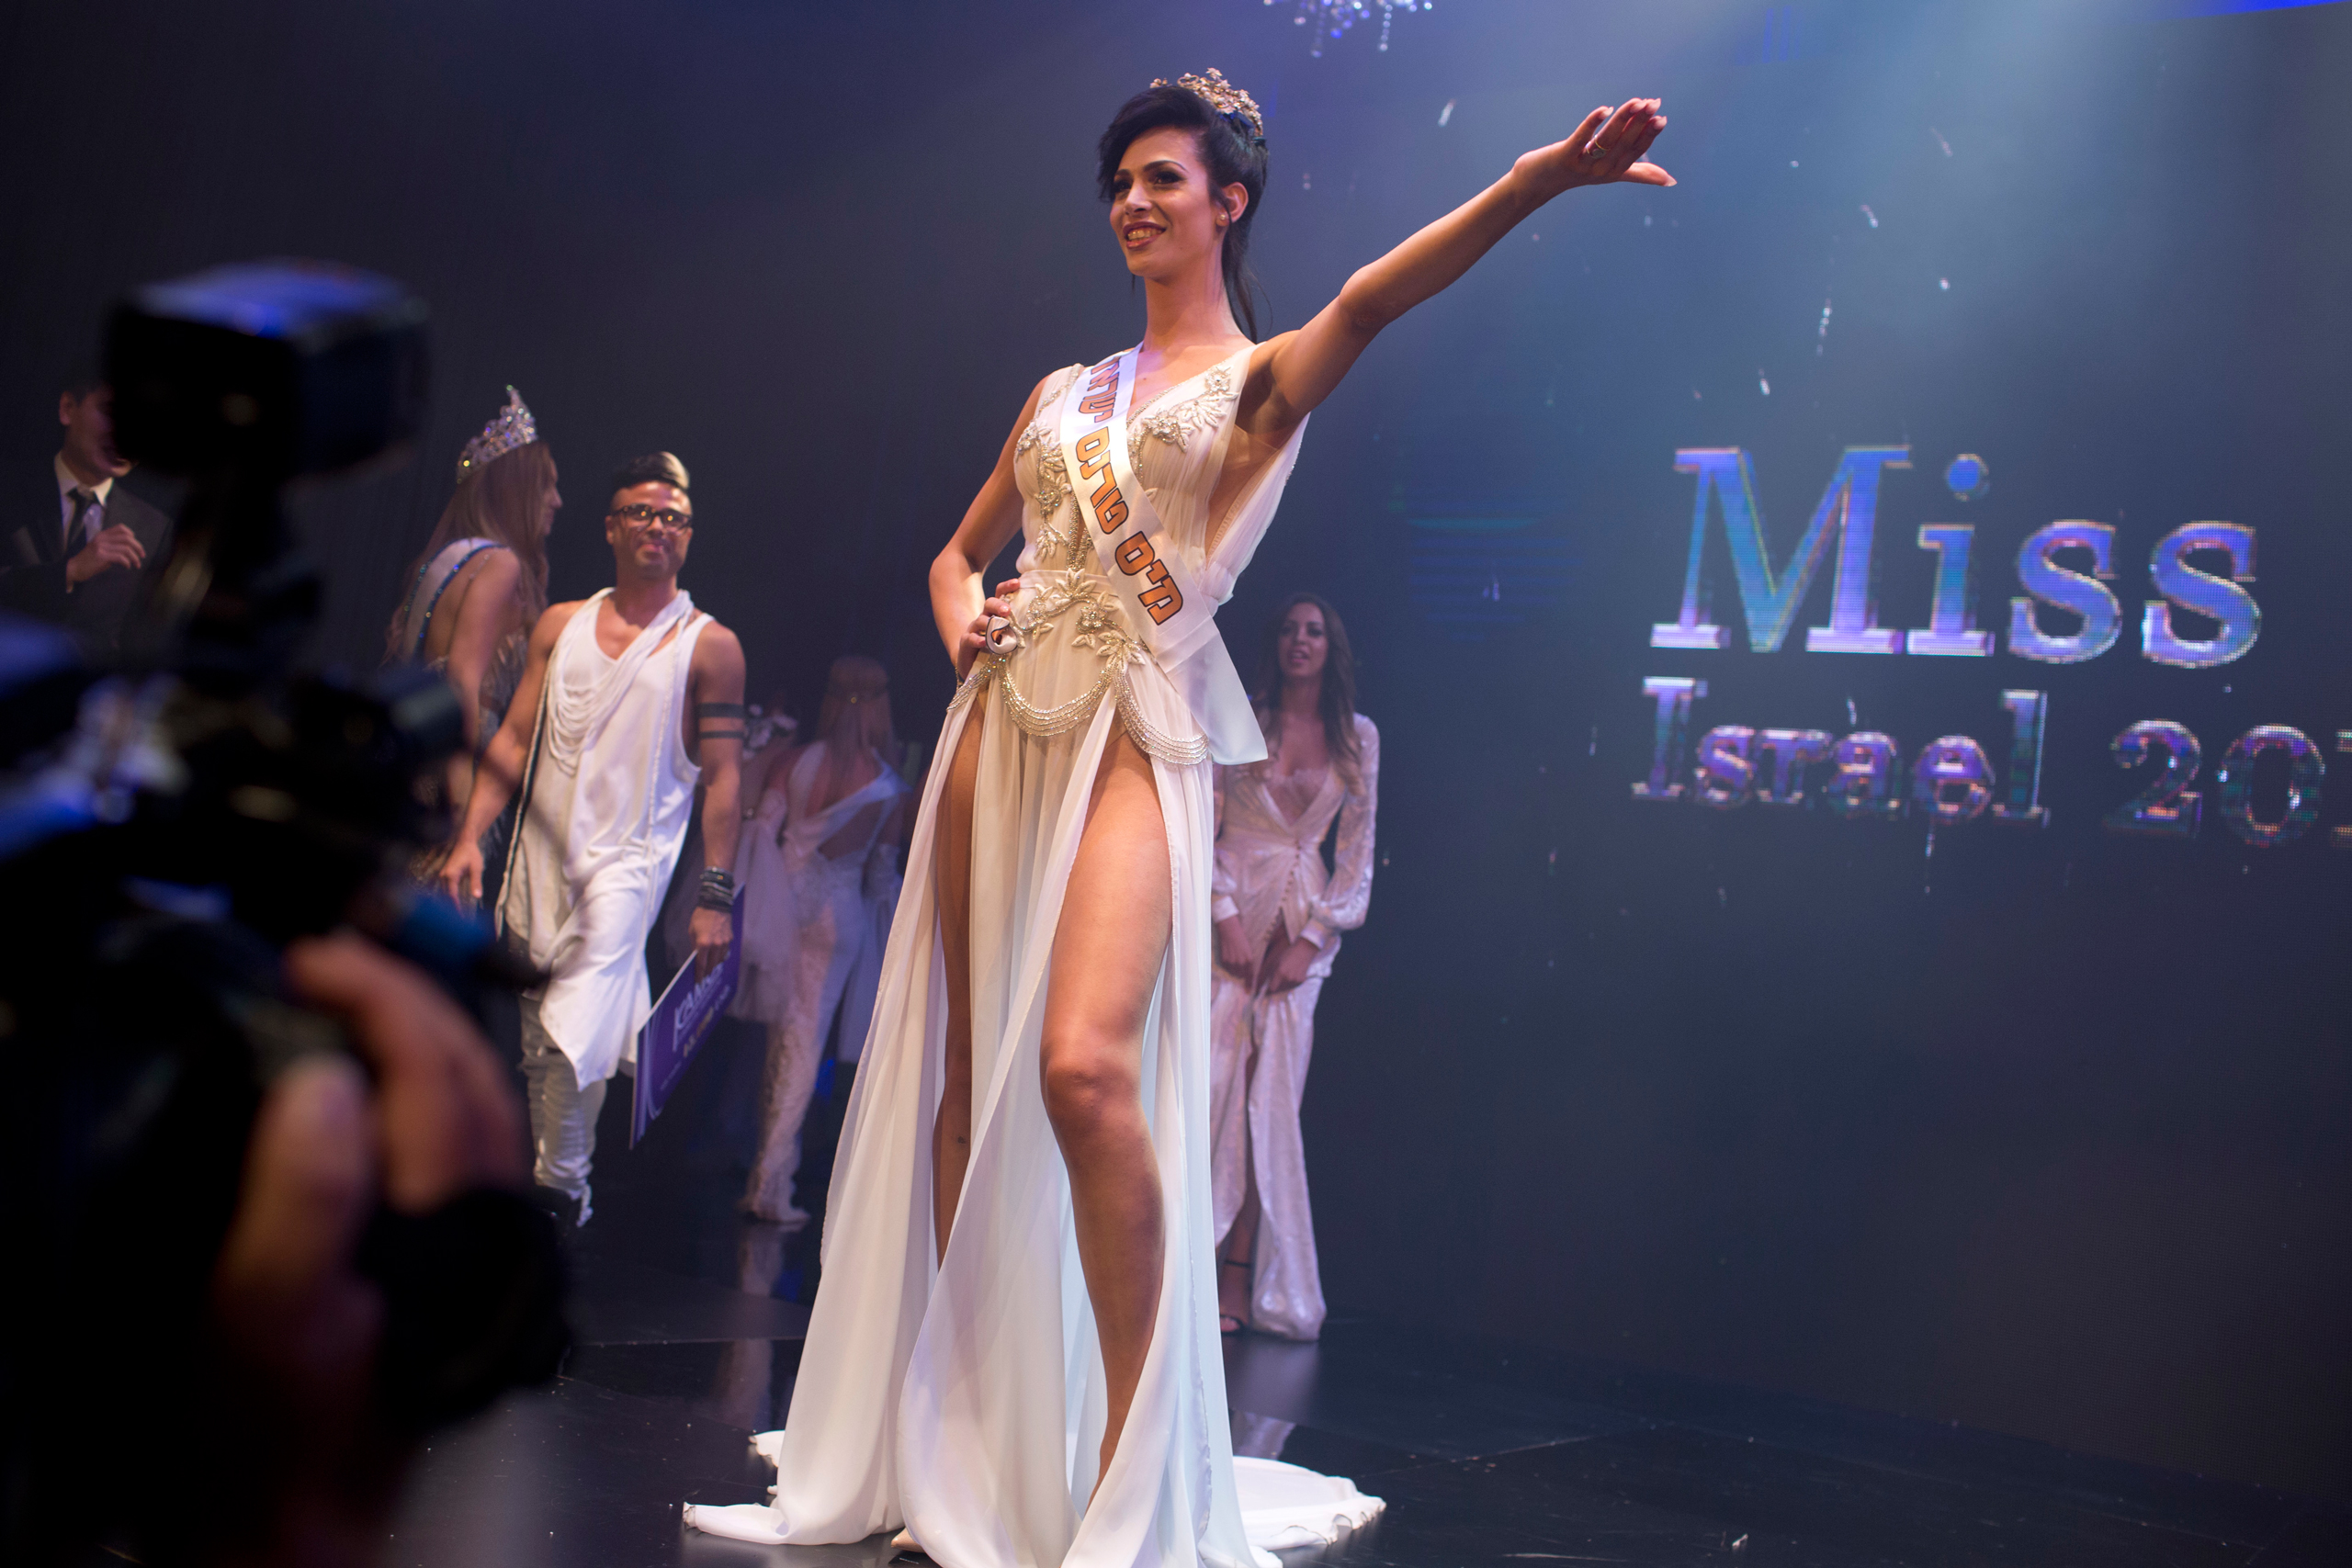 Israeli Arab Talleen Abu Hanna, 21, poses on stage after she was announced as the first Miss Trans Israel beauty pageant, at HaBima, Israel's national theater in Tel Aviv, Israel, Friday, May 27, 2016. Abu Hanna, an Israeli from a Catholic Arab family has been crowned the winner of the country's first transgender pageant. (AP Photo/Oded Balilty)